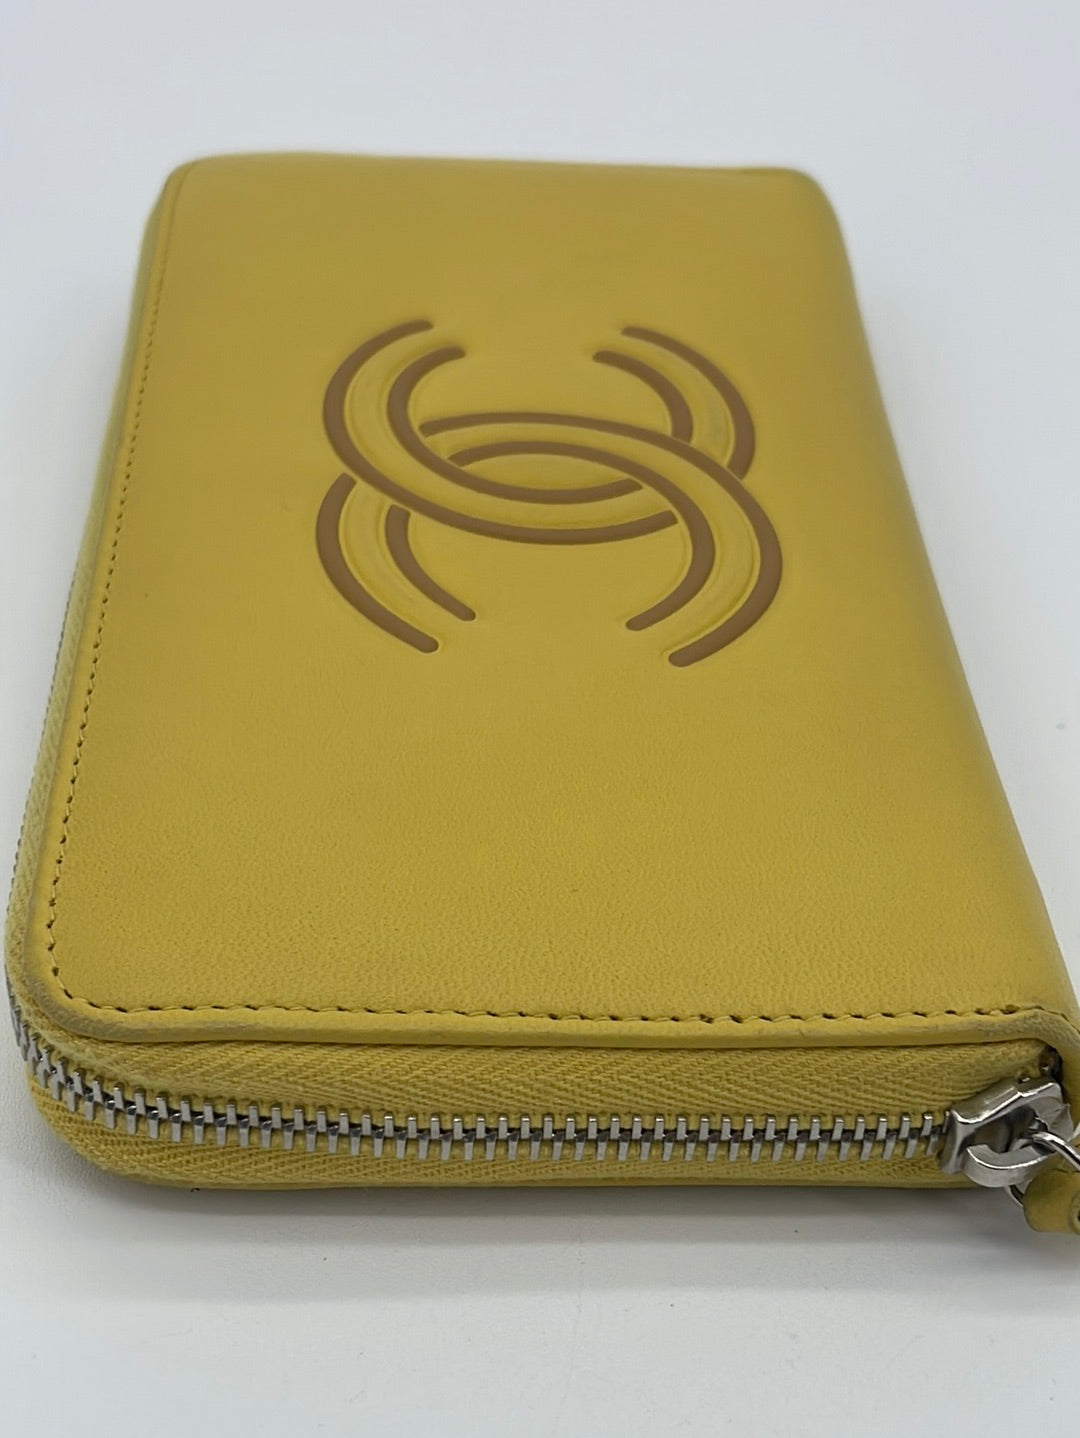 PRELOVED Chanel Yellow Timeless CC Zip Around Wallet 23859785 052223